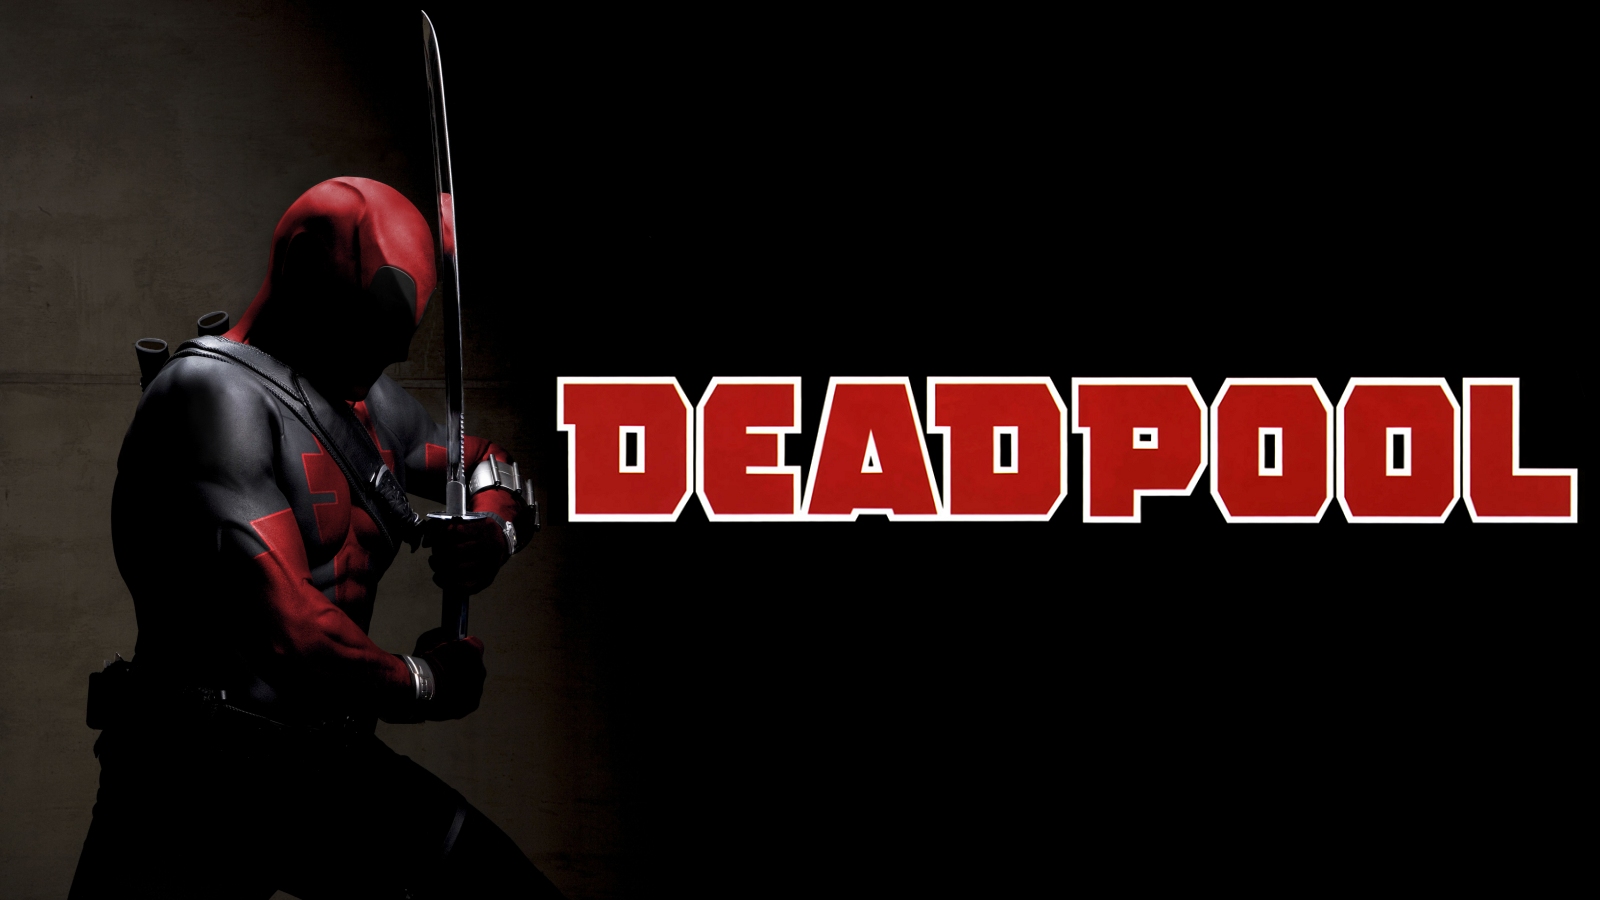  November By Stephen Comments Off on Deadpool Movie Wallpaper